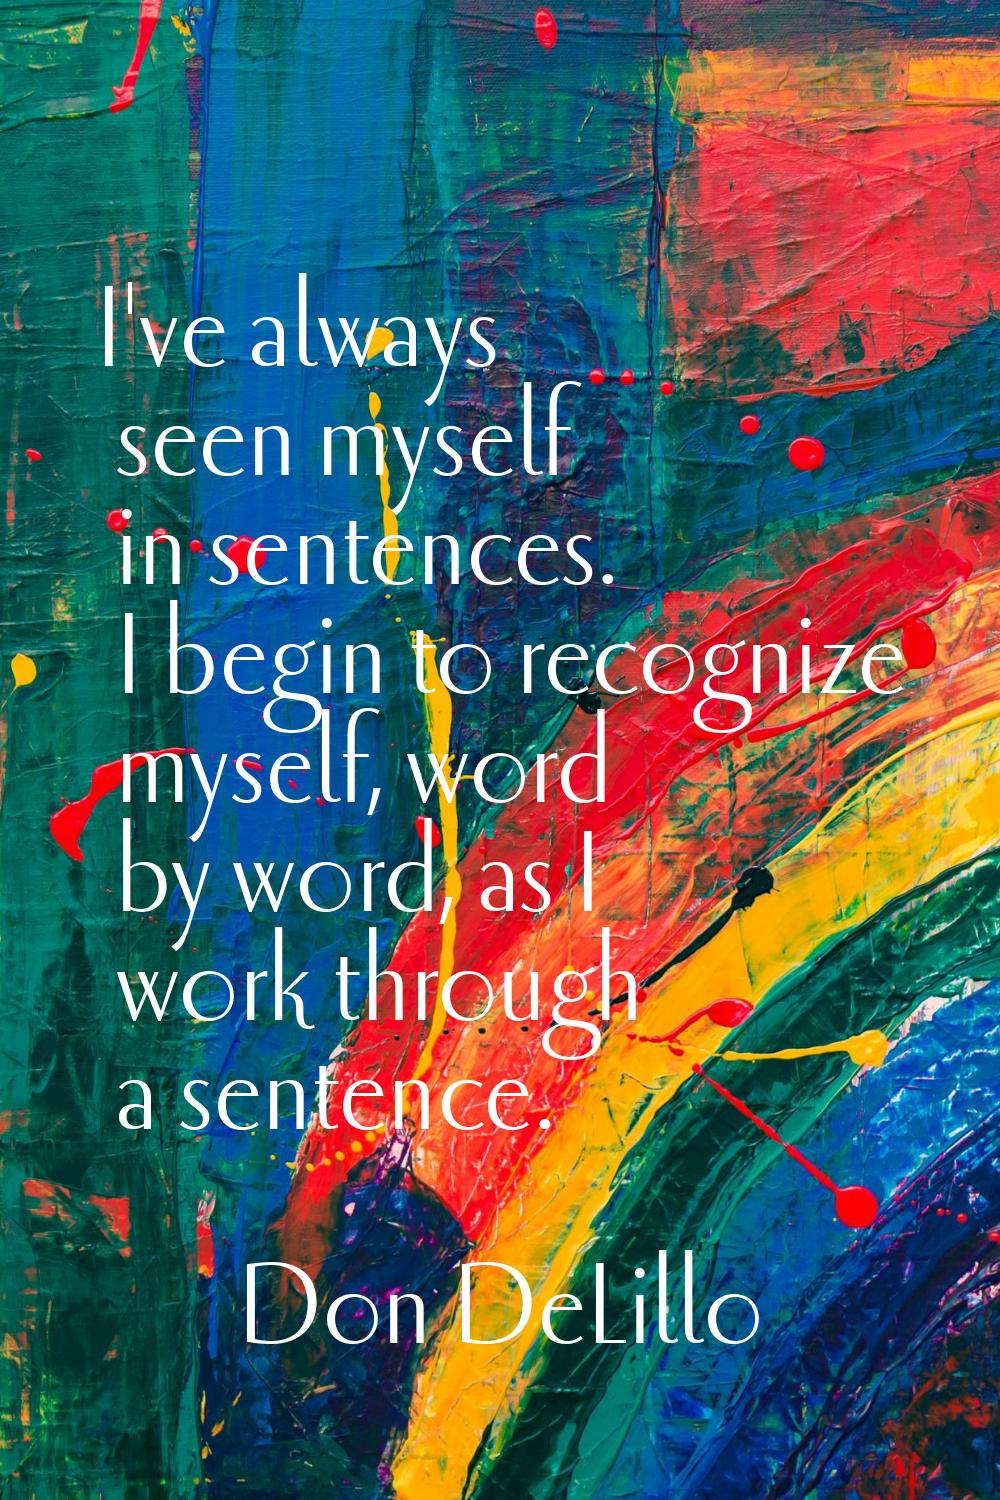 I've always seen myself in sentences. I begin to recognize myself, word by word, as I work through 